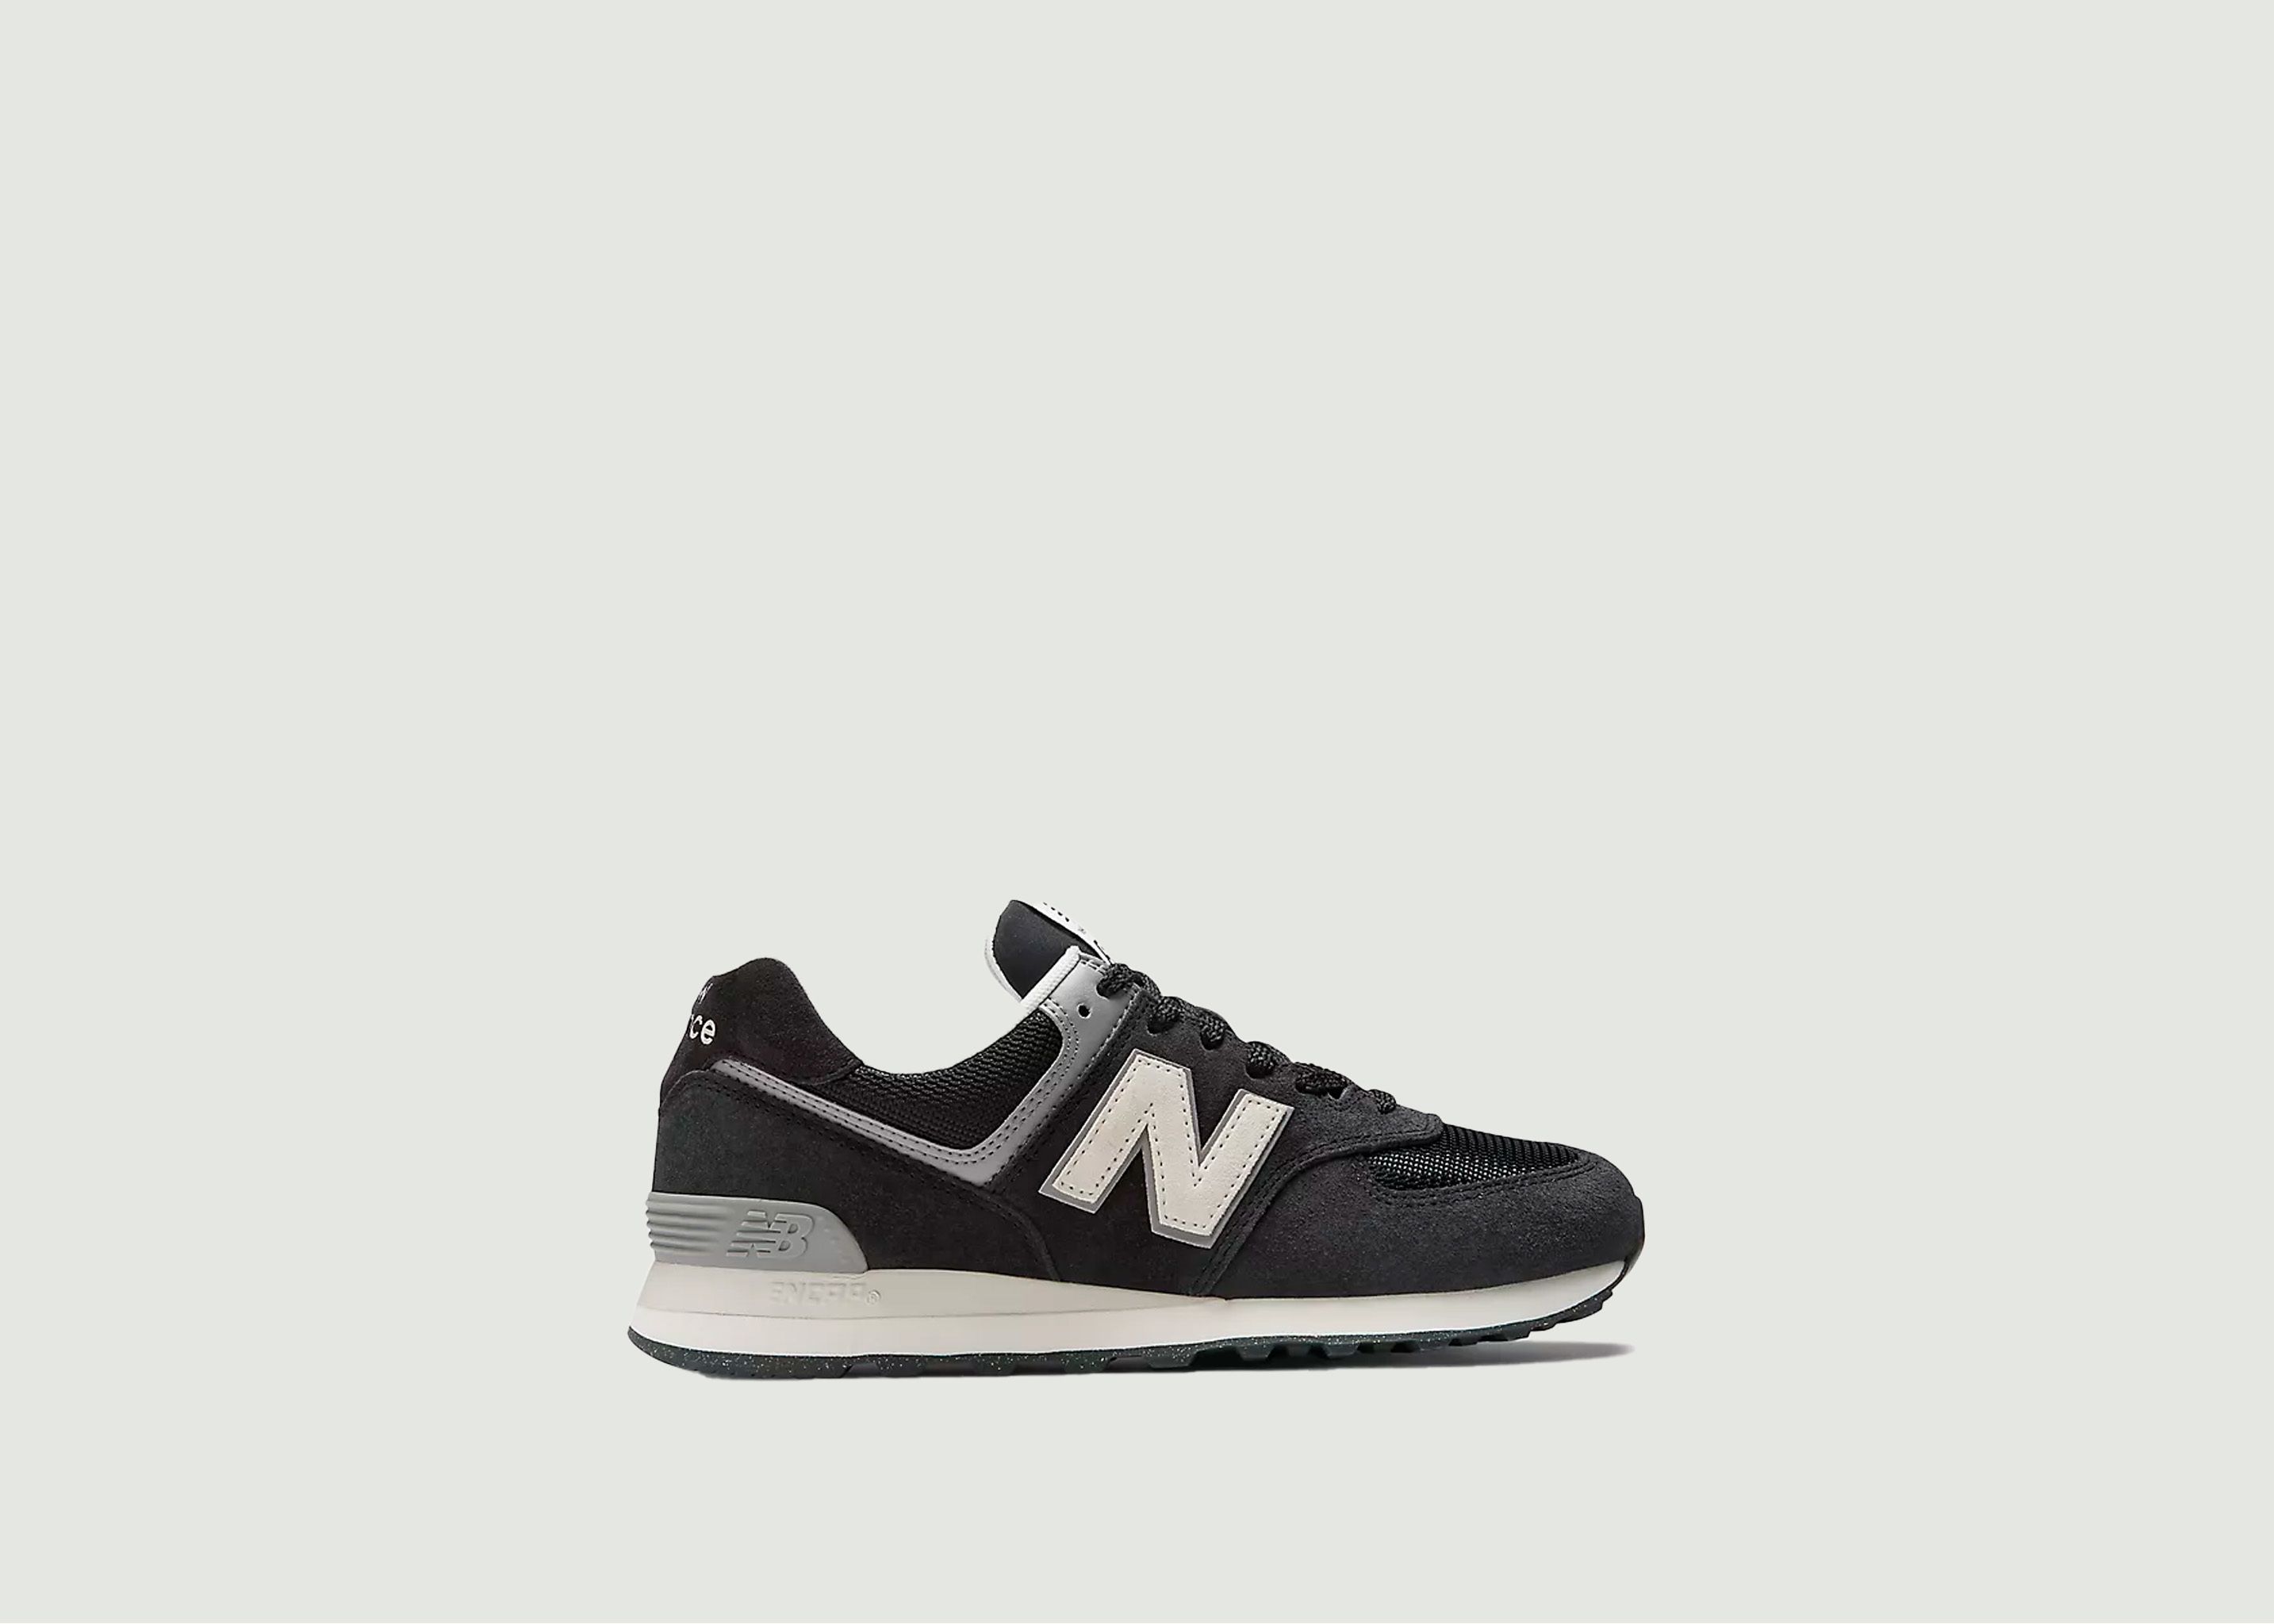 574 Sneakers - New Balance